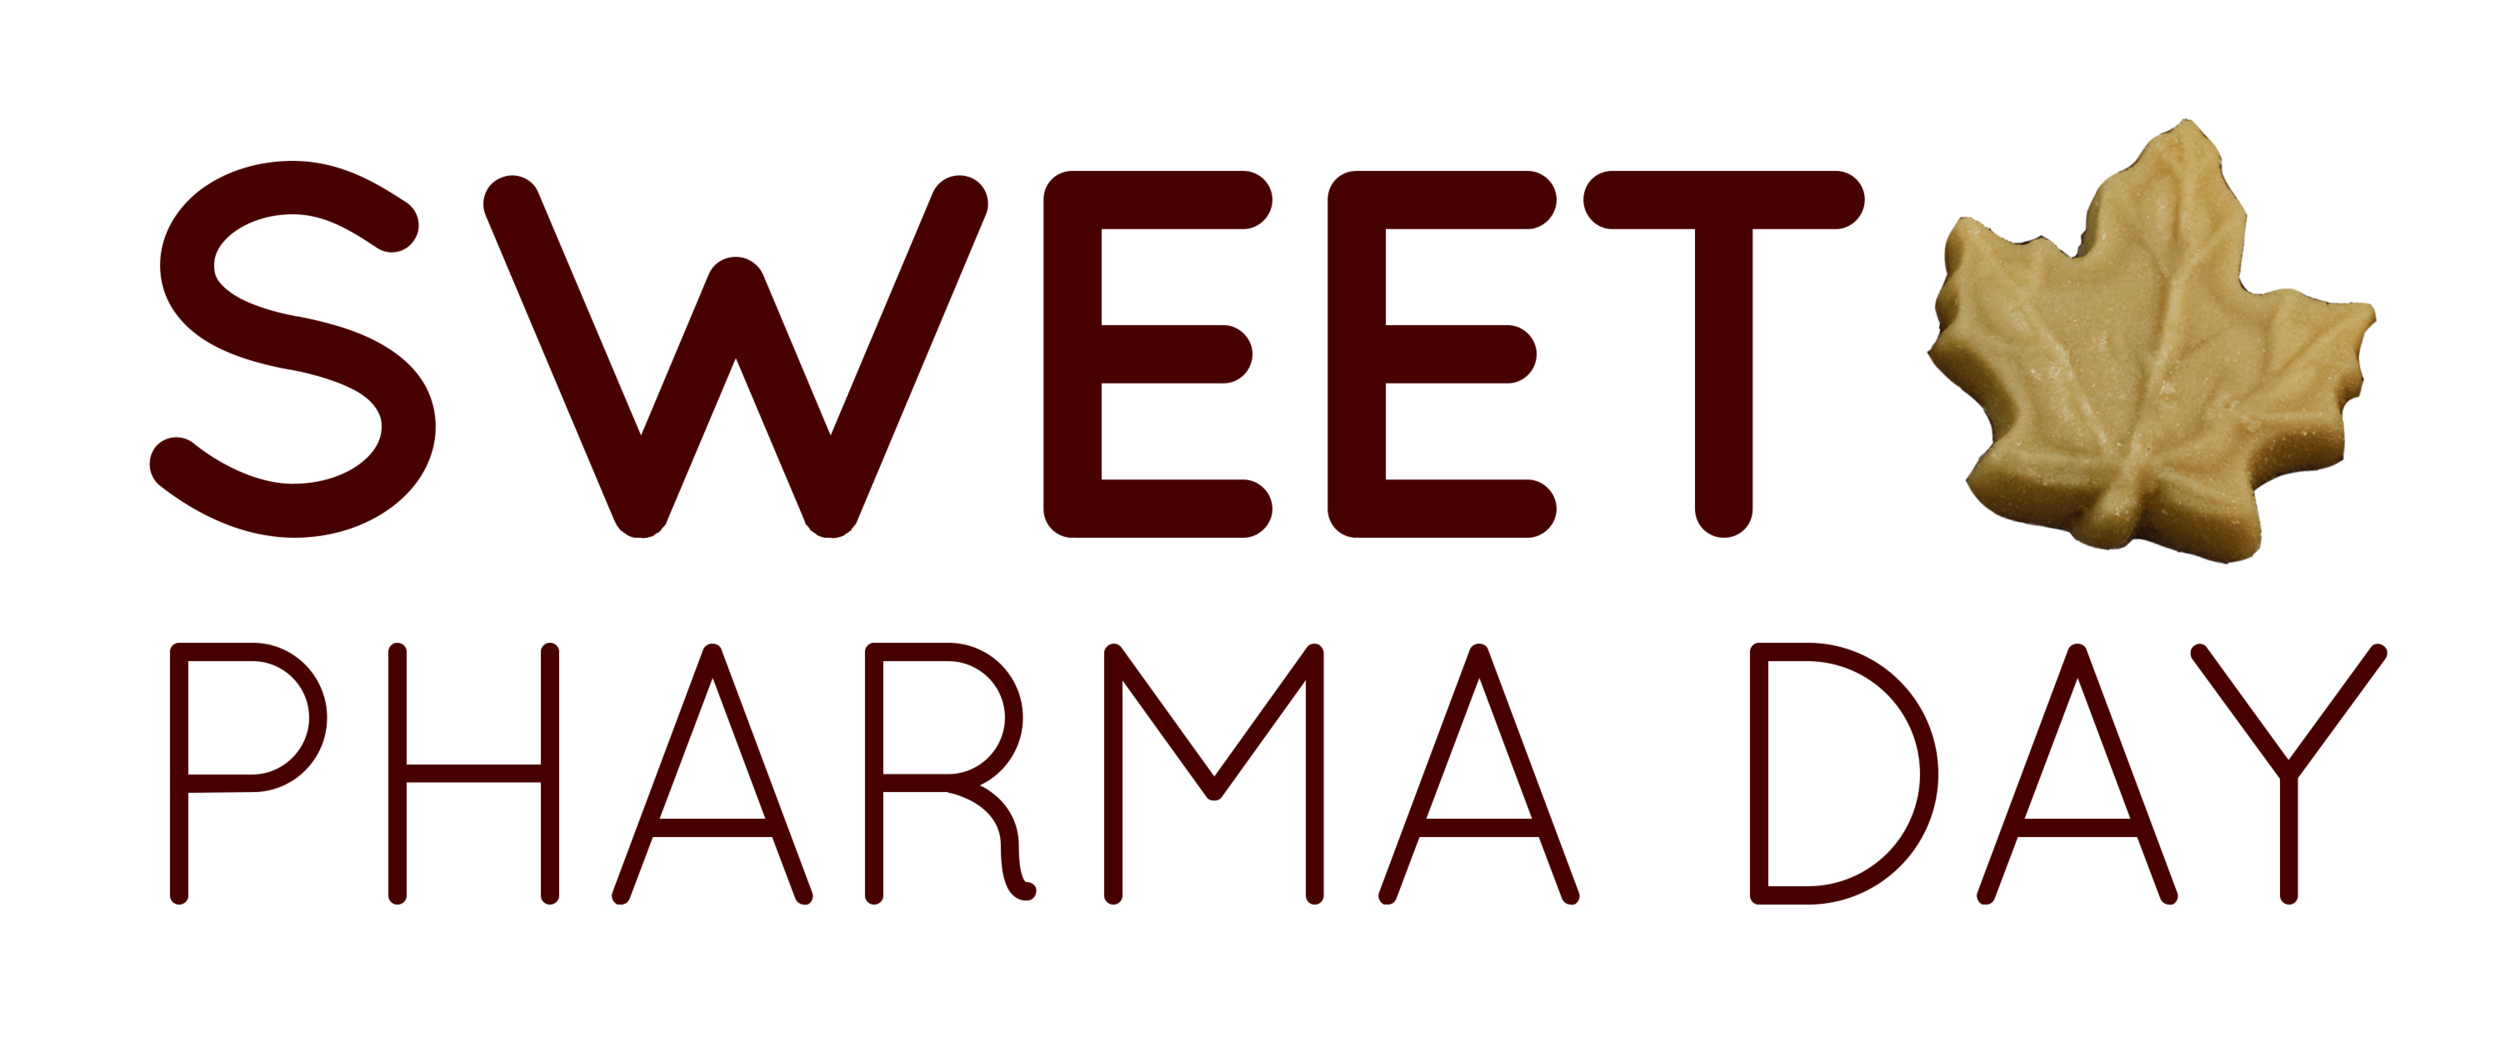 Mediphage is One of 16 Companies Selected to Present at Sweet Pharma Day Conference